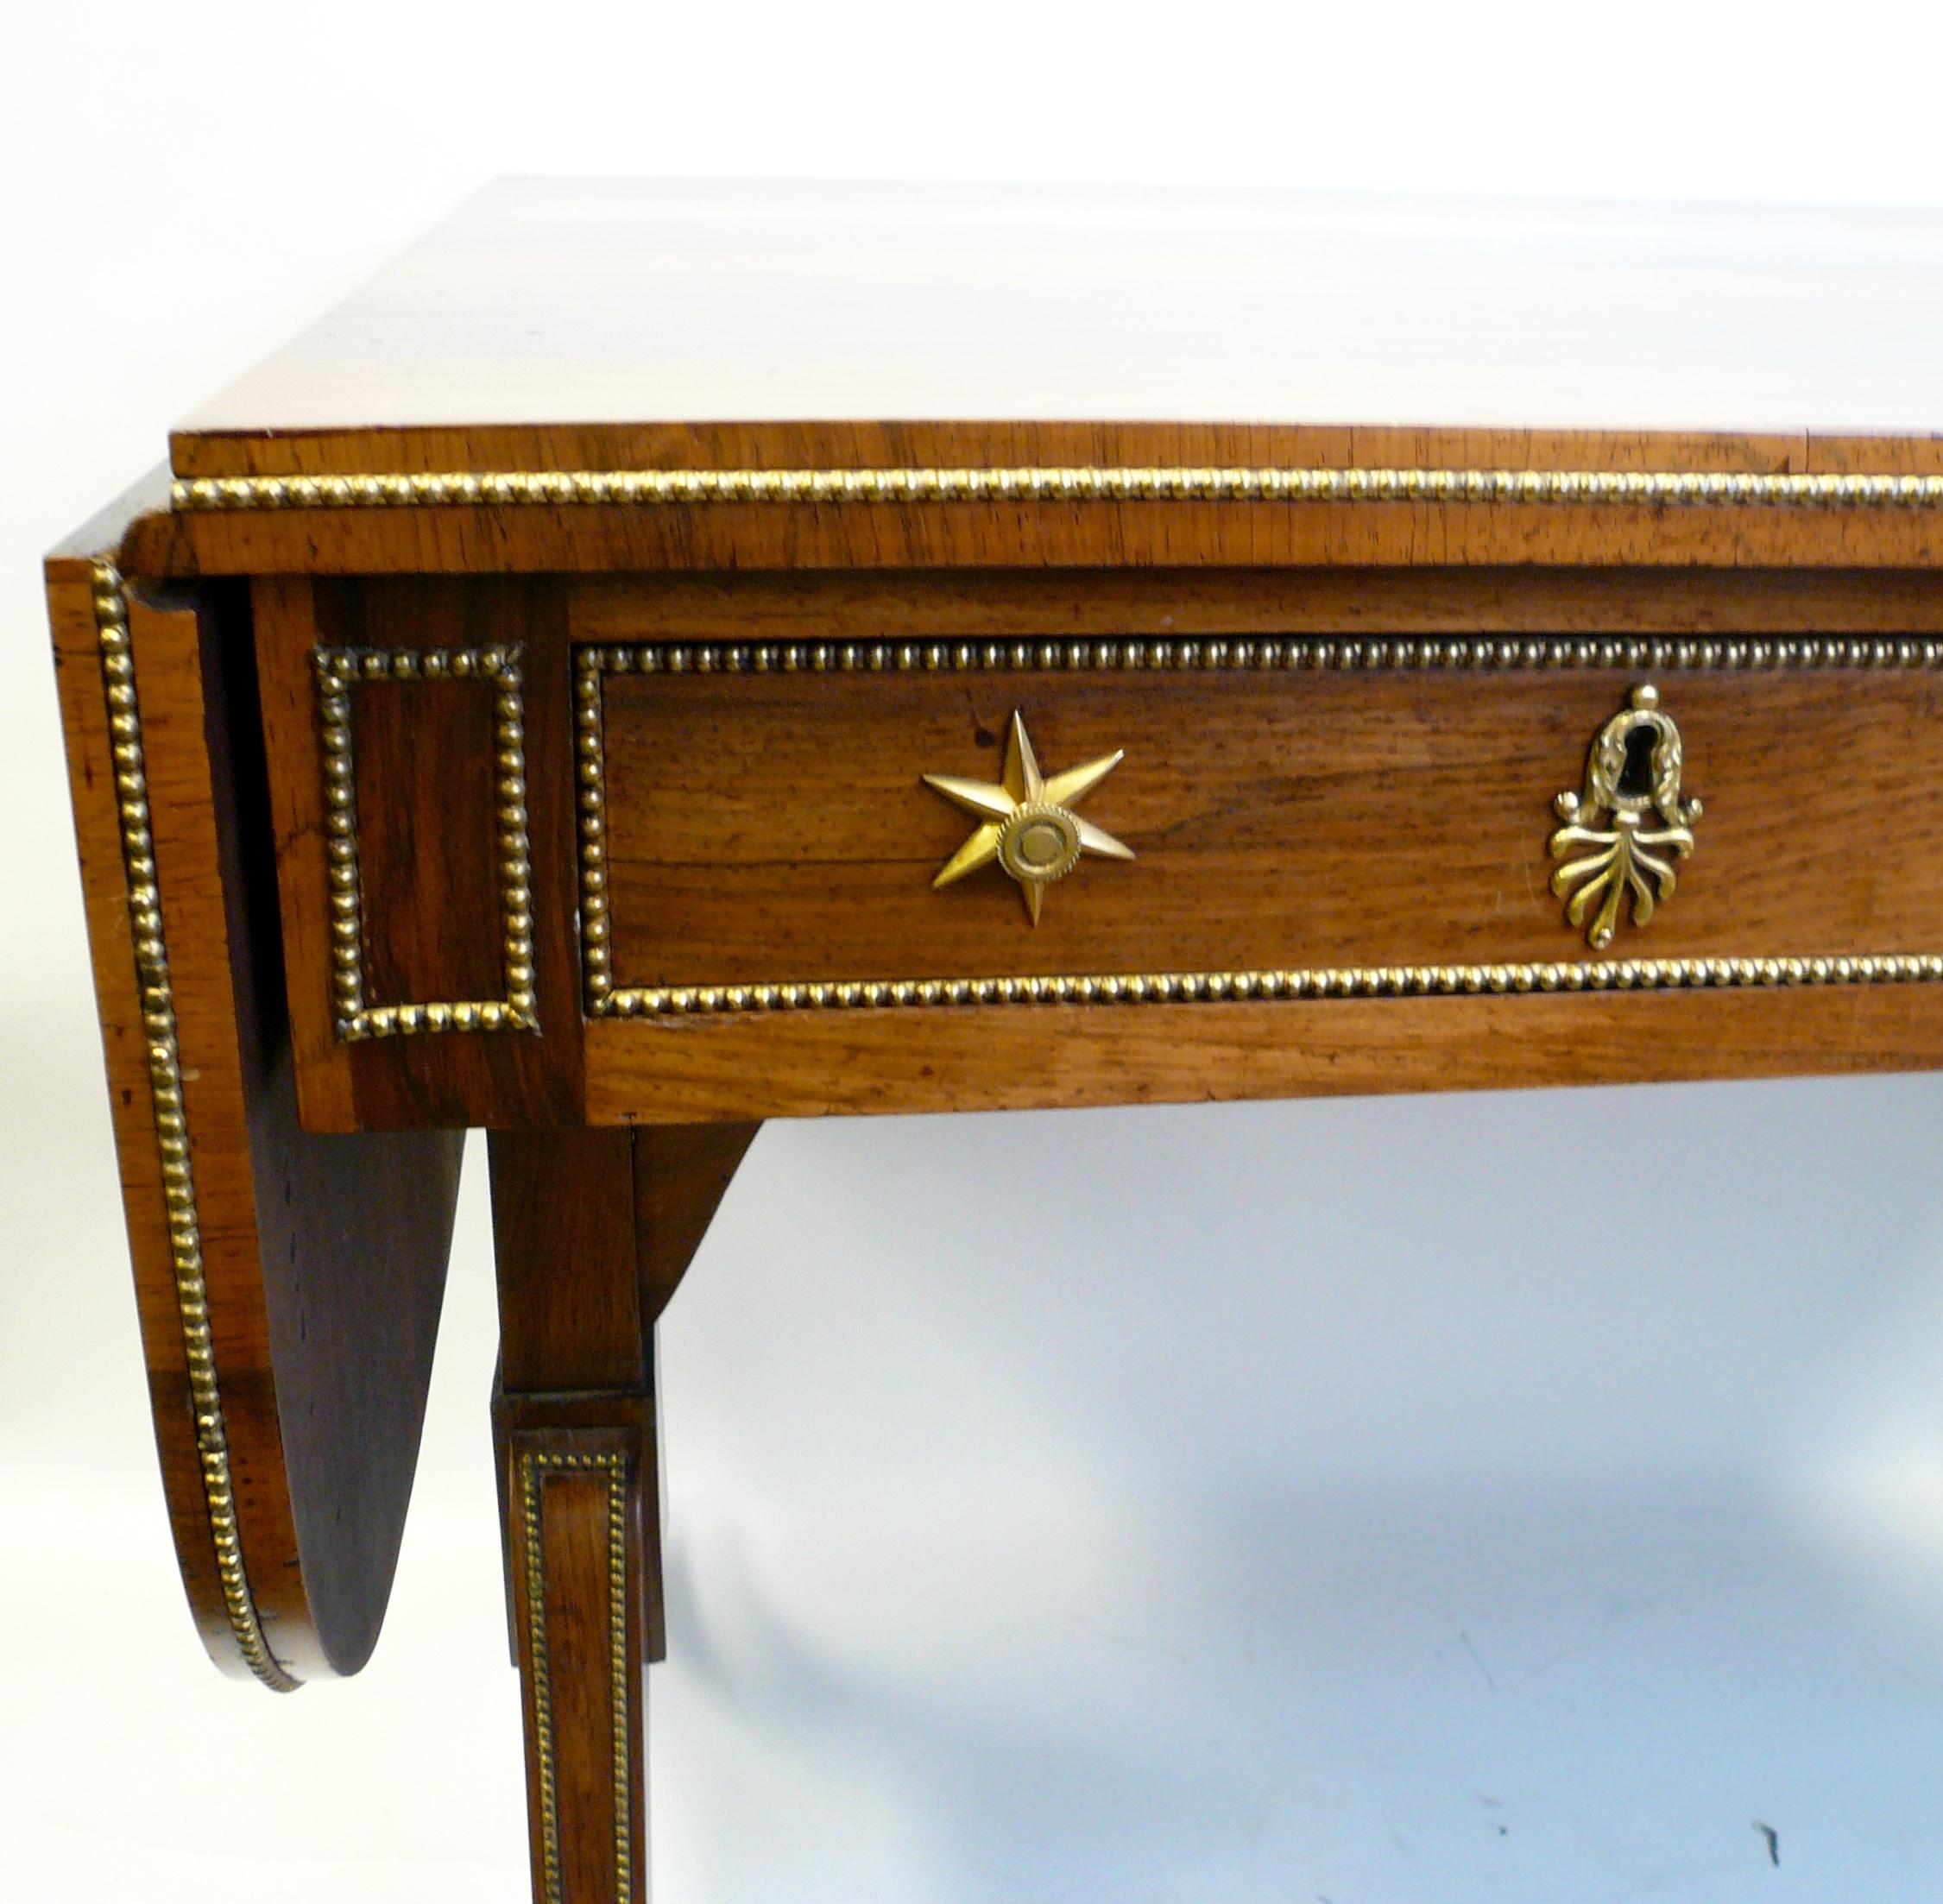 This exceptional Regency rosewood sofa table is beautifully made. Having well matched rosewood veneers and gilt brass mounts, it is attributed to Gillows of Lancaster. For related examples, see: Gillows of Lancaster and London by Susan E. Stuart,